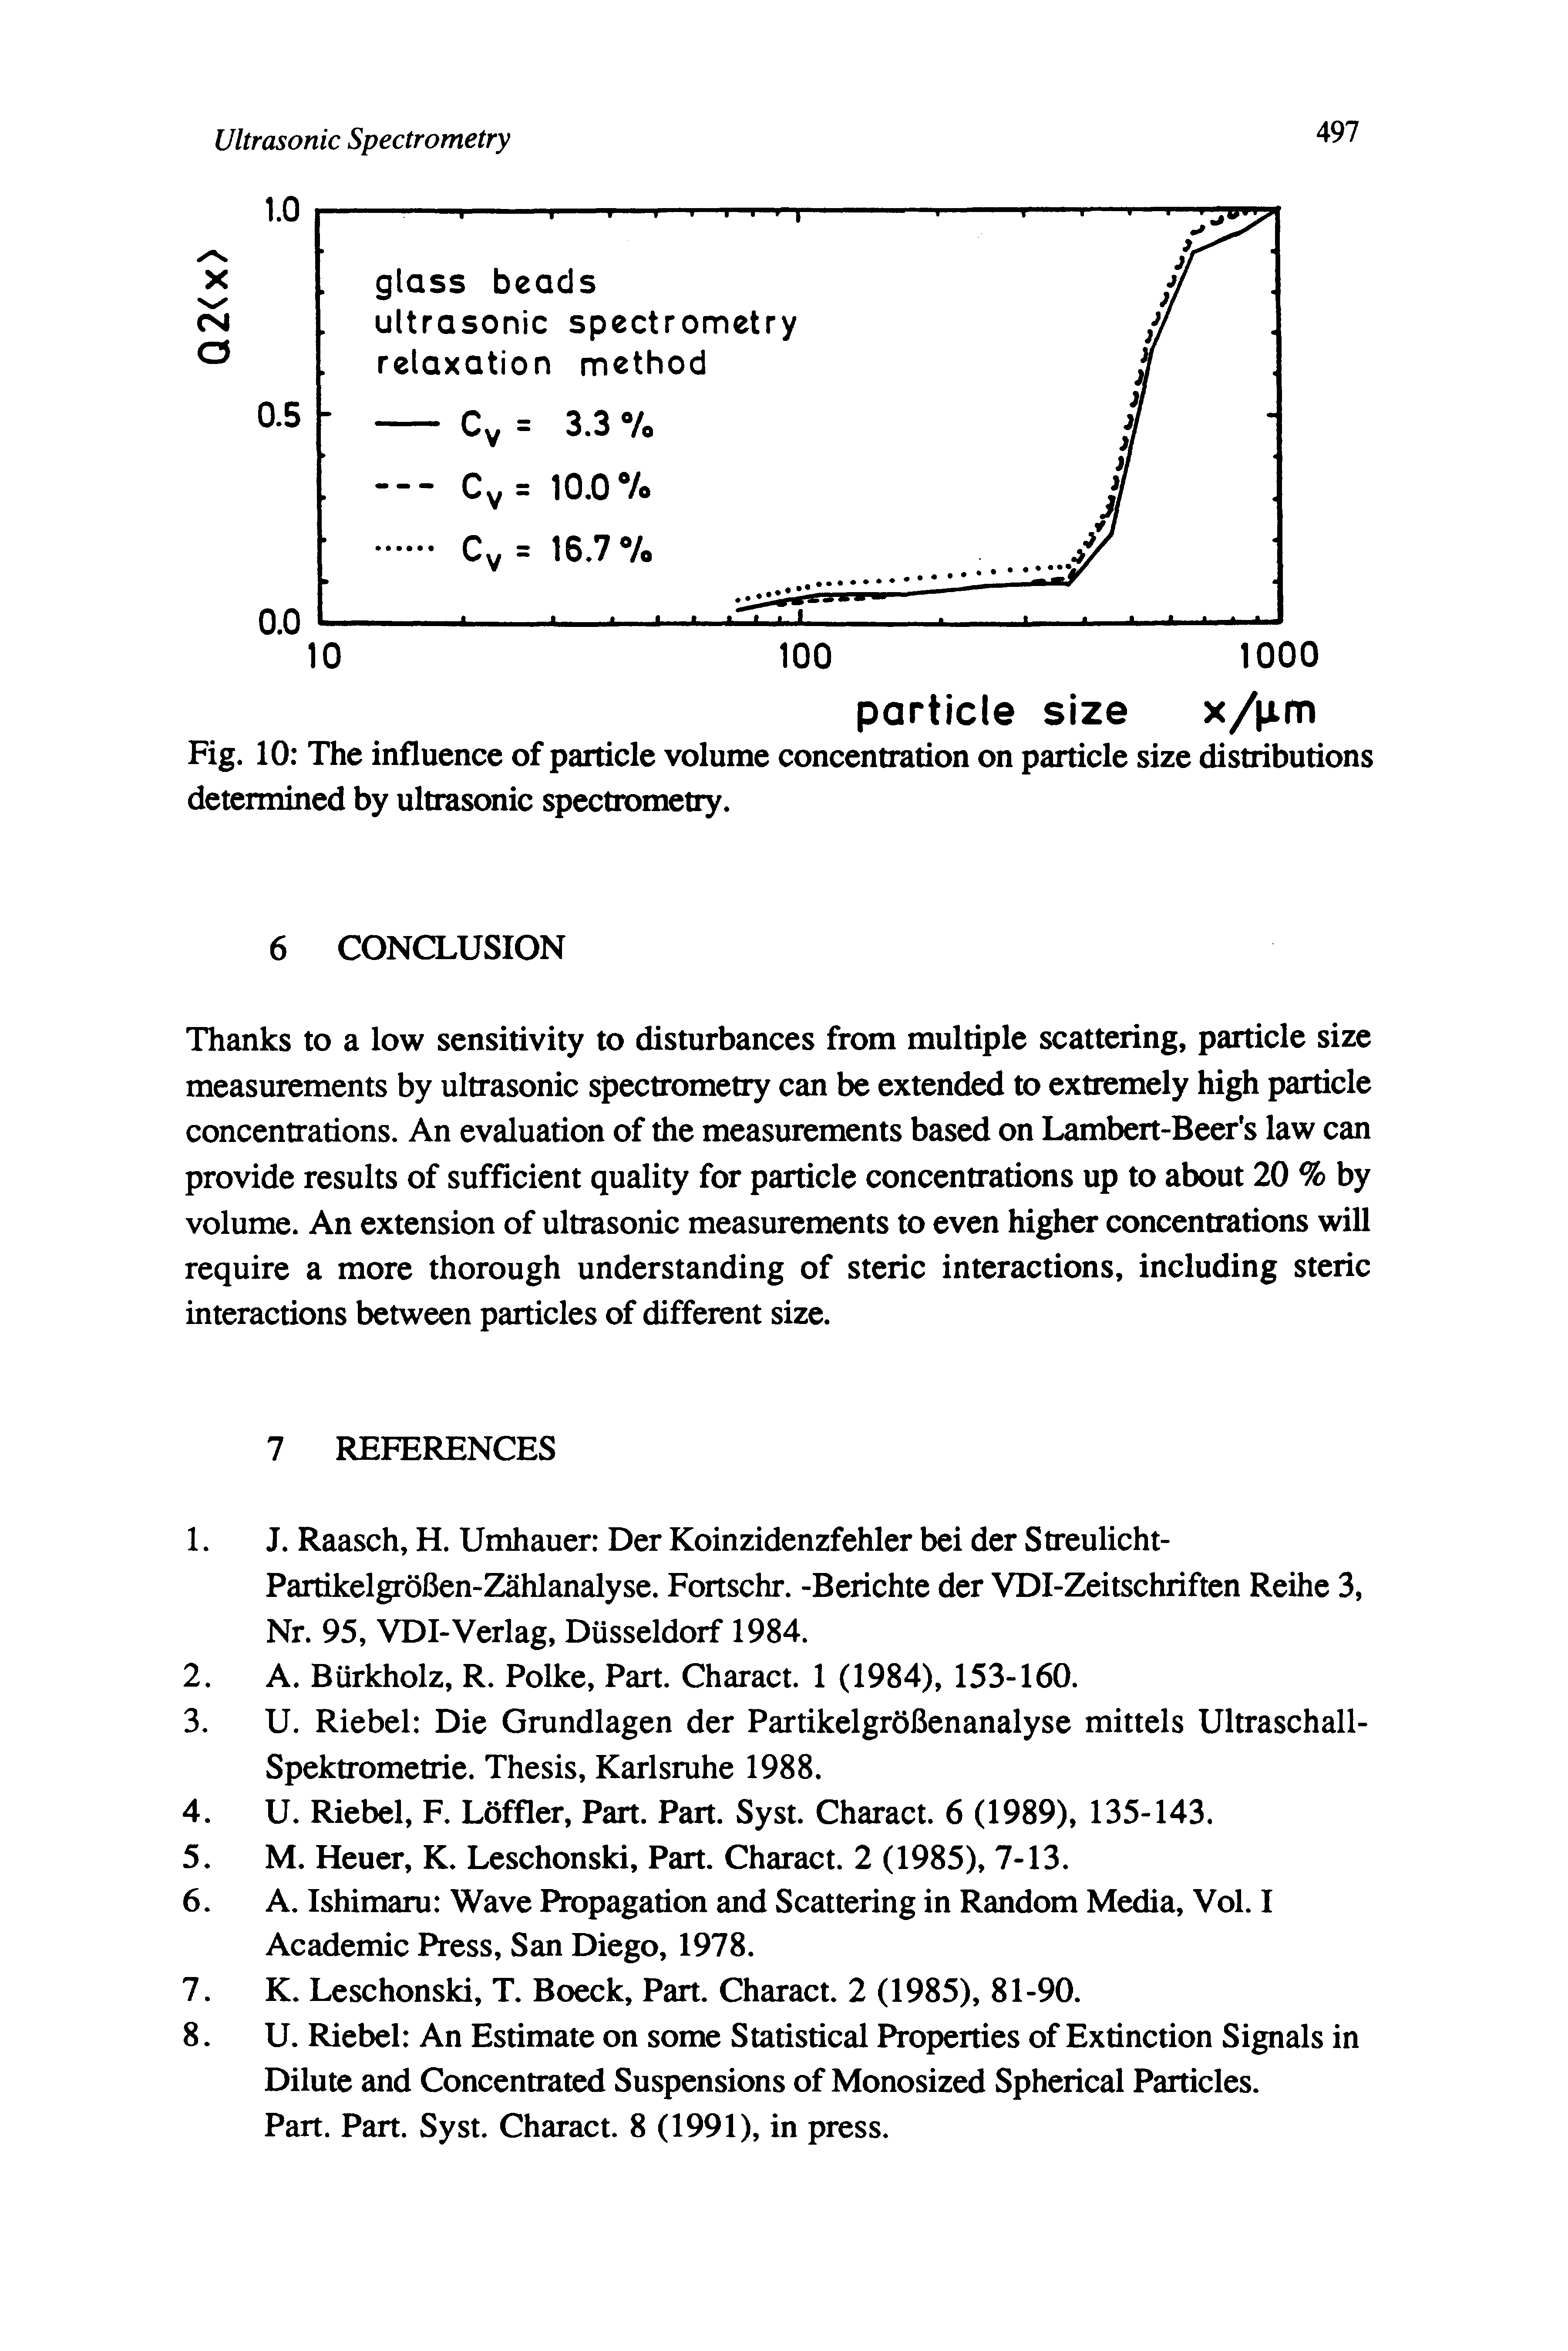 Fig. 10 The influence of particle volume concentration on particle size distributions determined by ultrasonic spectrometry.